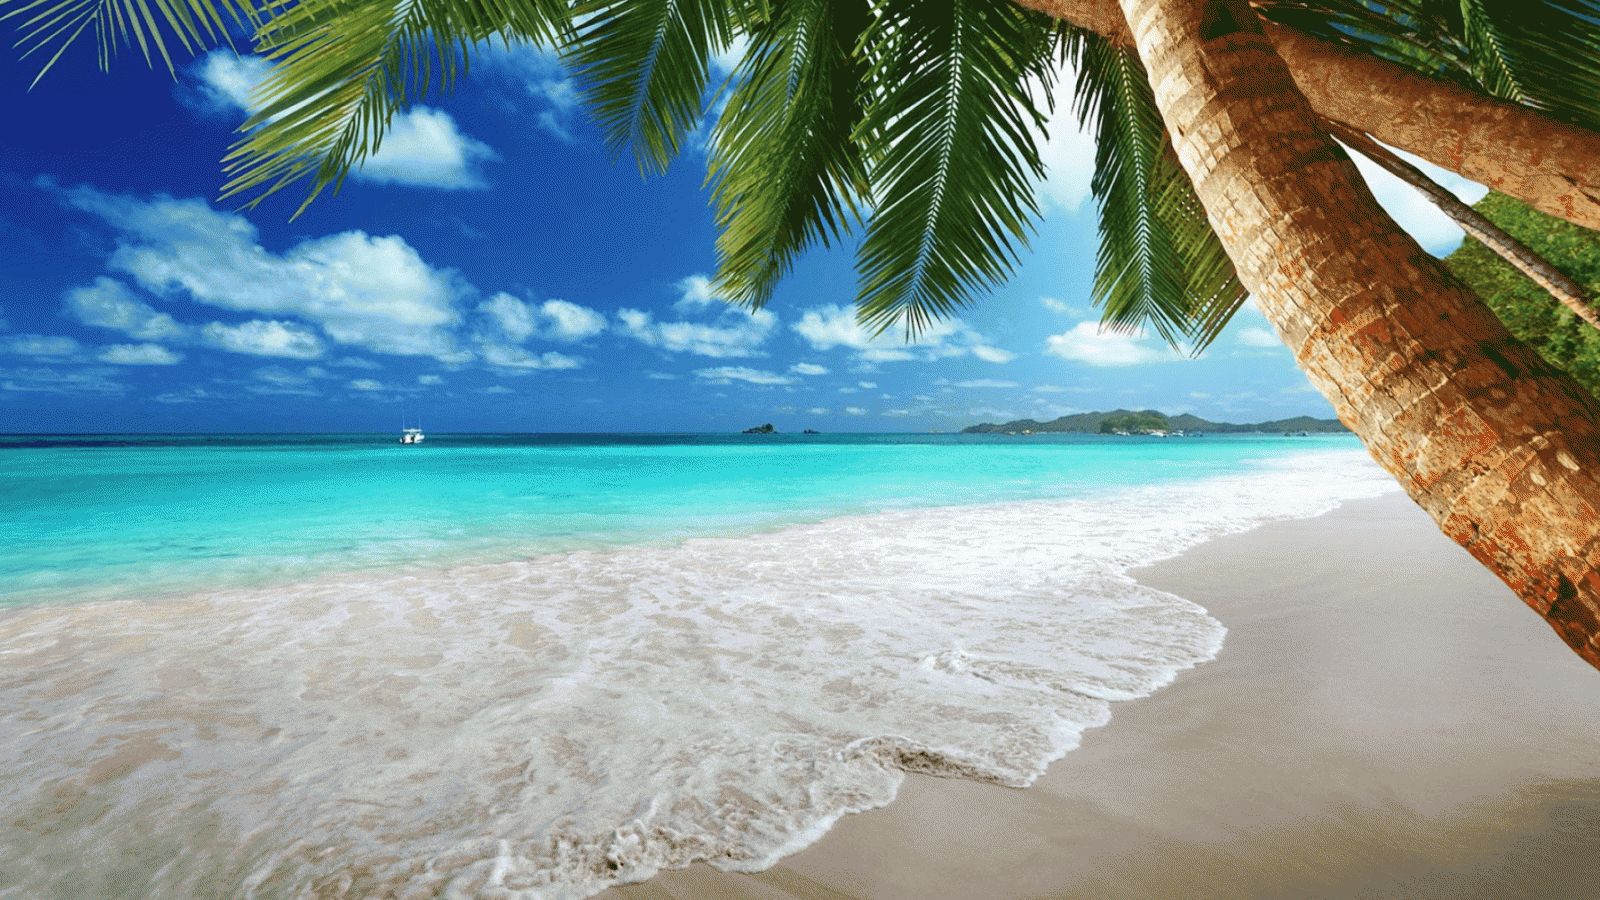 11 Amazing Android Live Wallpapers For Summer - Beaches In Uganda , HD Wallpaper & Backgrounds